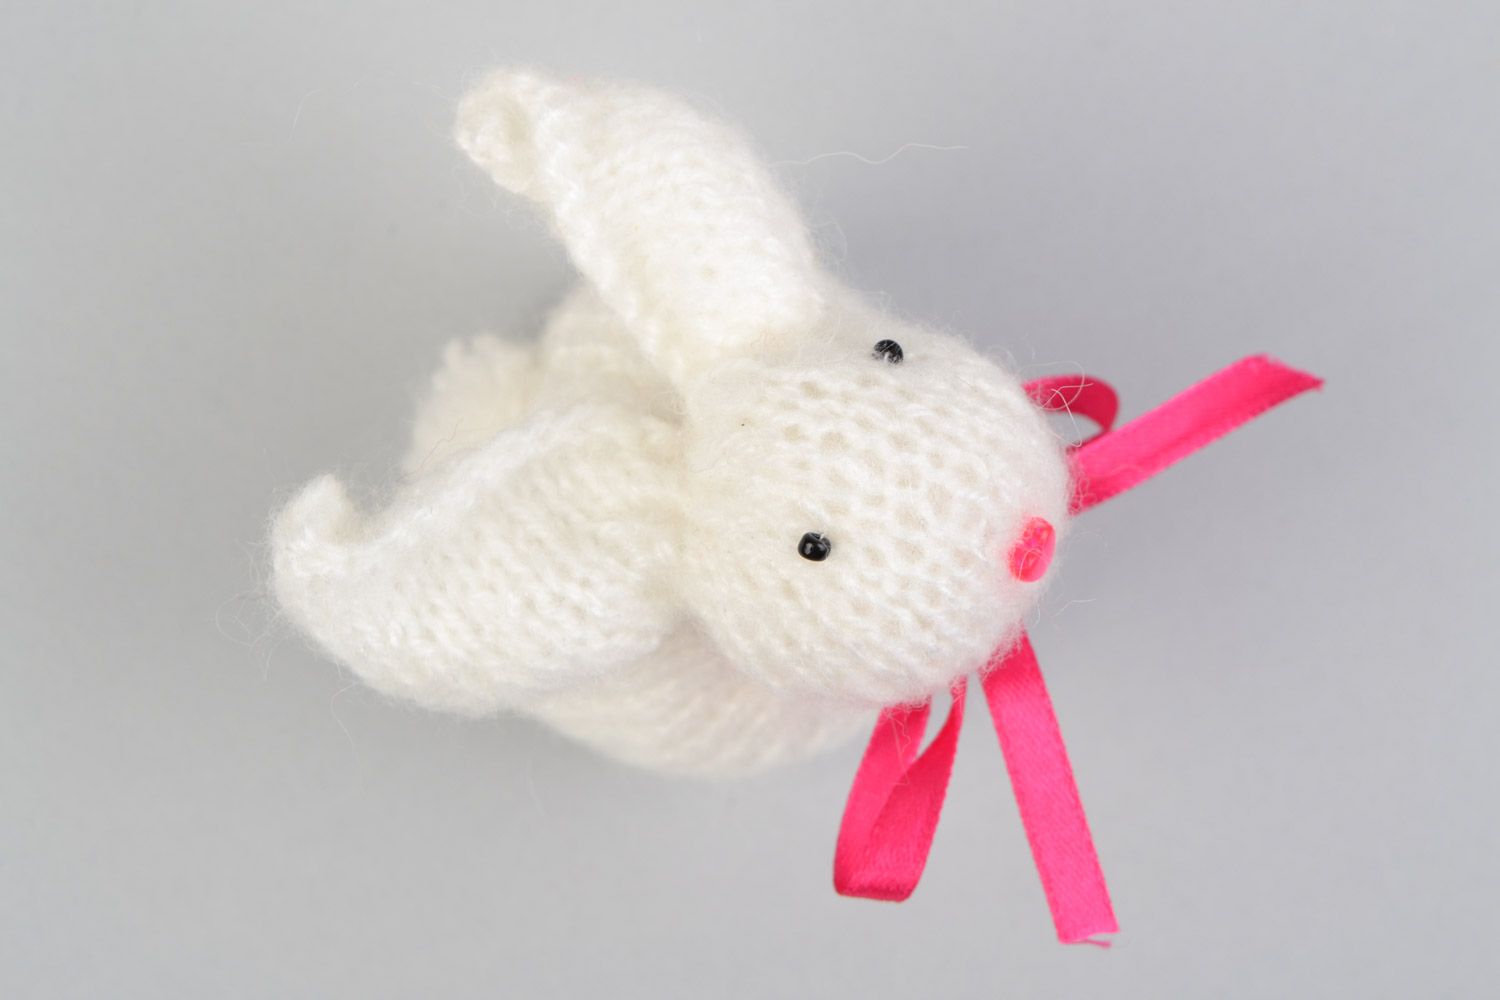 Handmade soft toy knitted of angora wool in the shape of white rabbit with pink bow photo 3